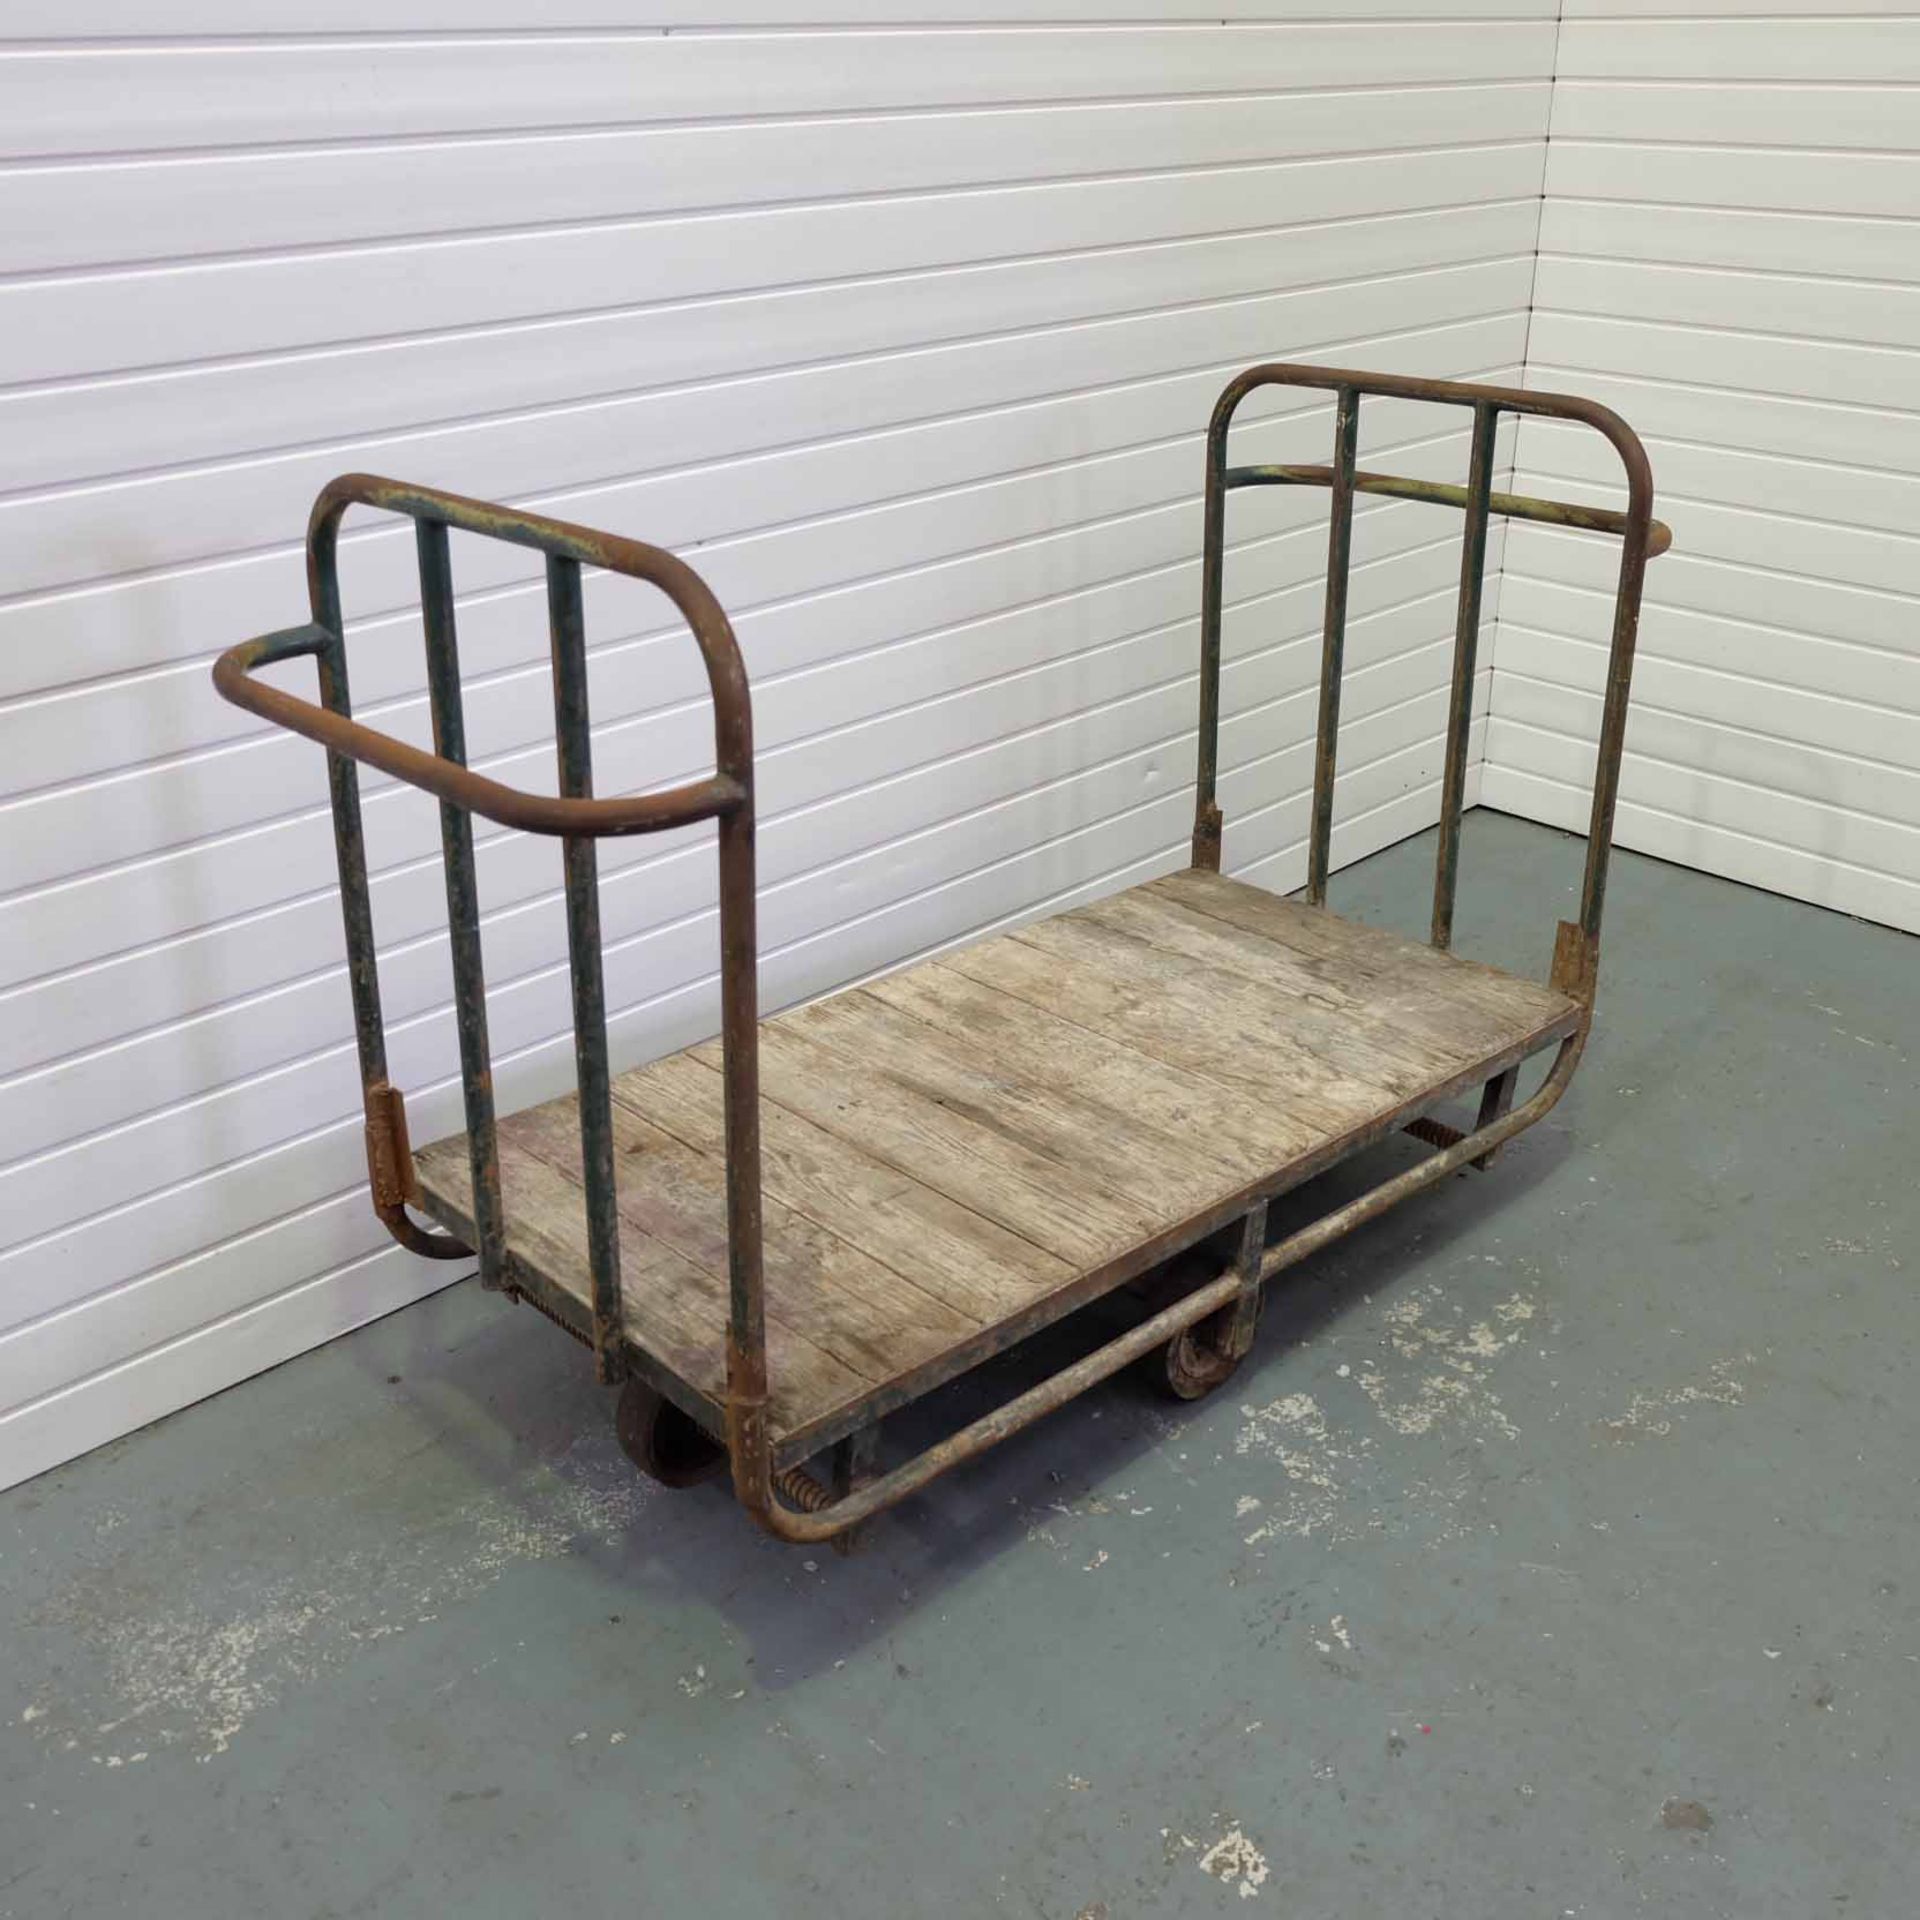 Vintage Luggage Trolley. Size 54" x 27" x 41 1/2". - Image 2 of 4